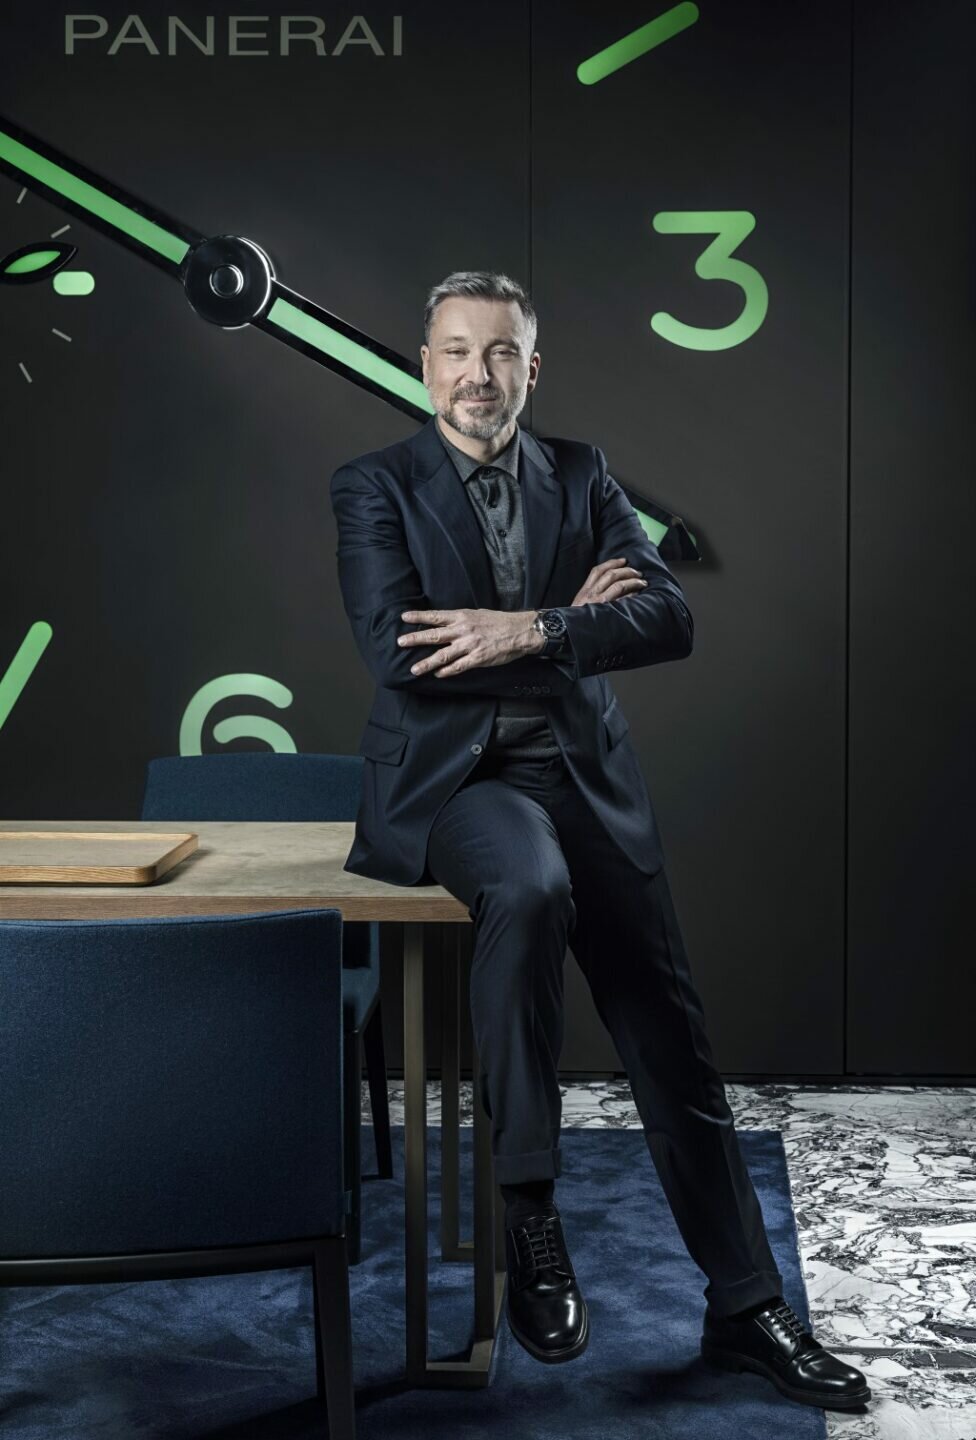 Panerai CEO Jean-Marc Pontroué On The Brand’s Journey To Sustainability And Web 3